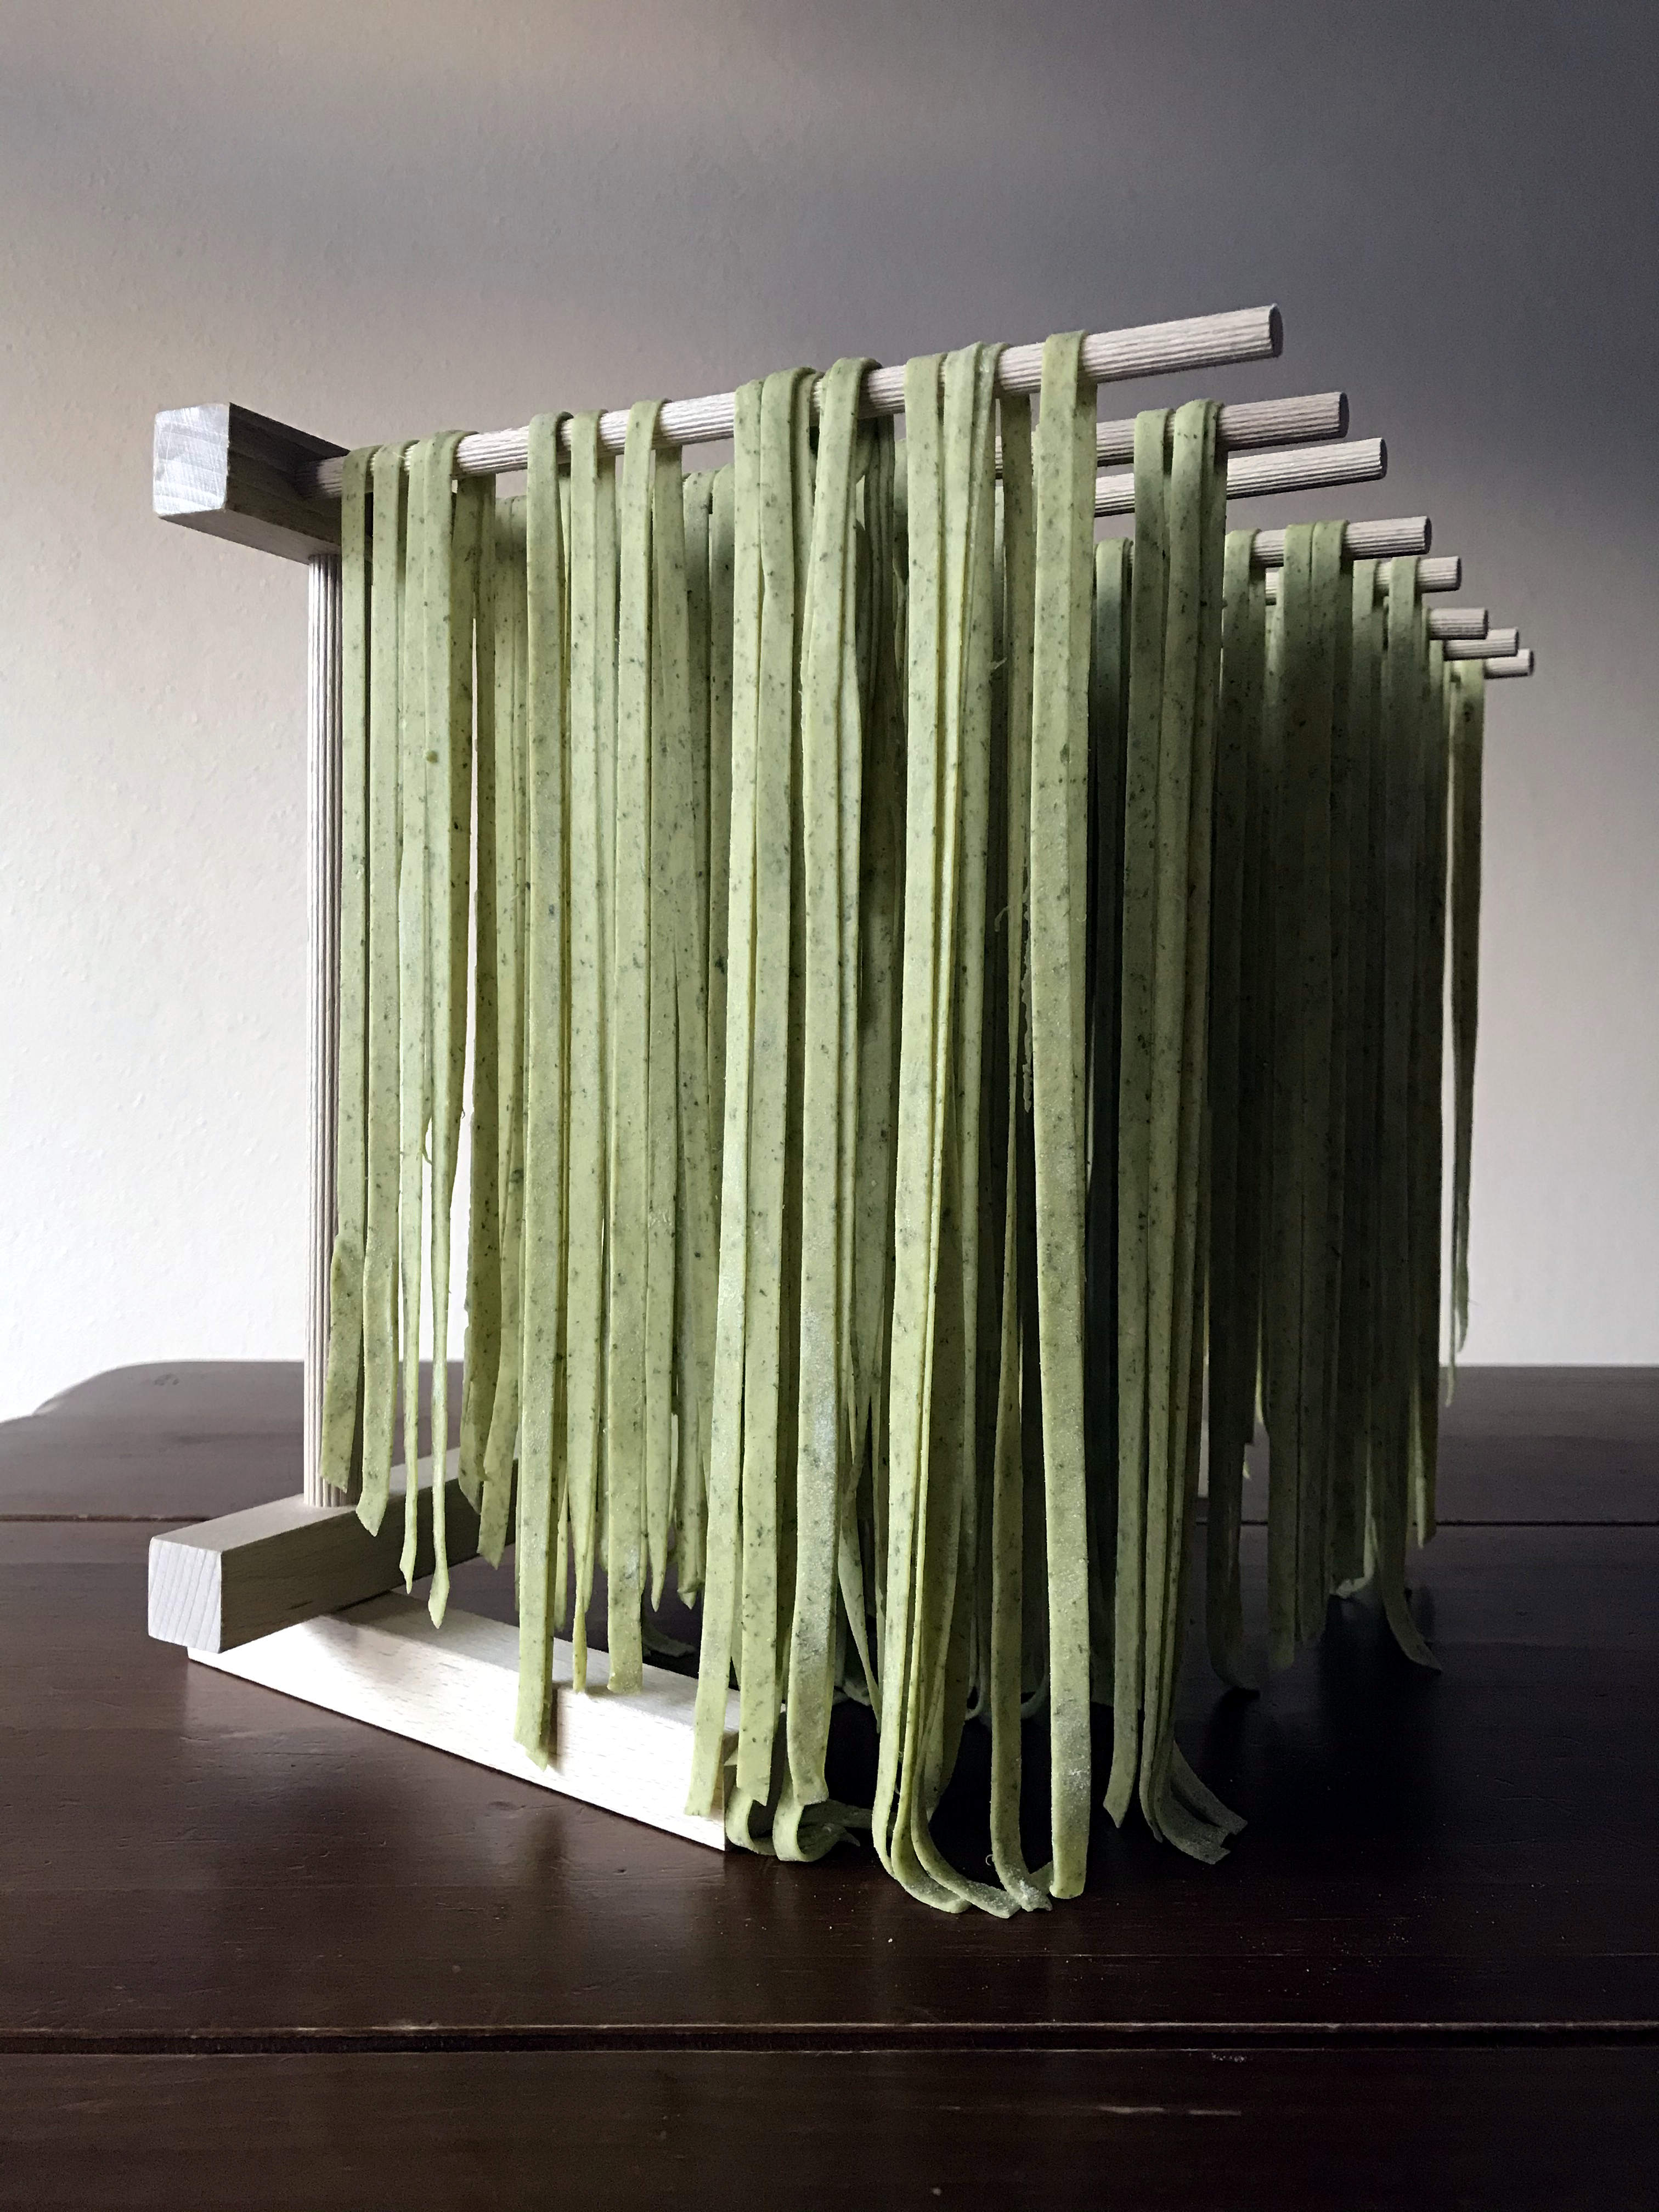 Green pasta noodles hang on a drying rack. The rack is sitting on a dark wooden table.